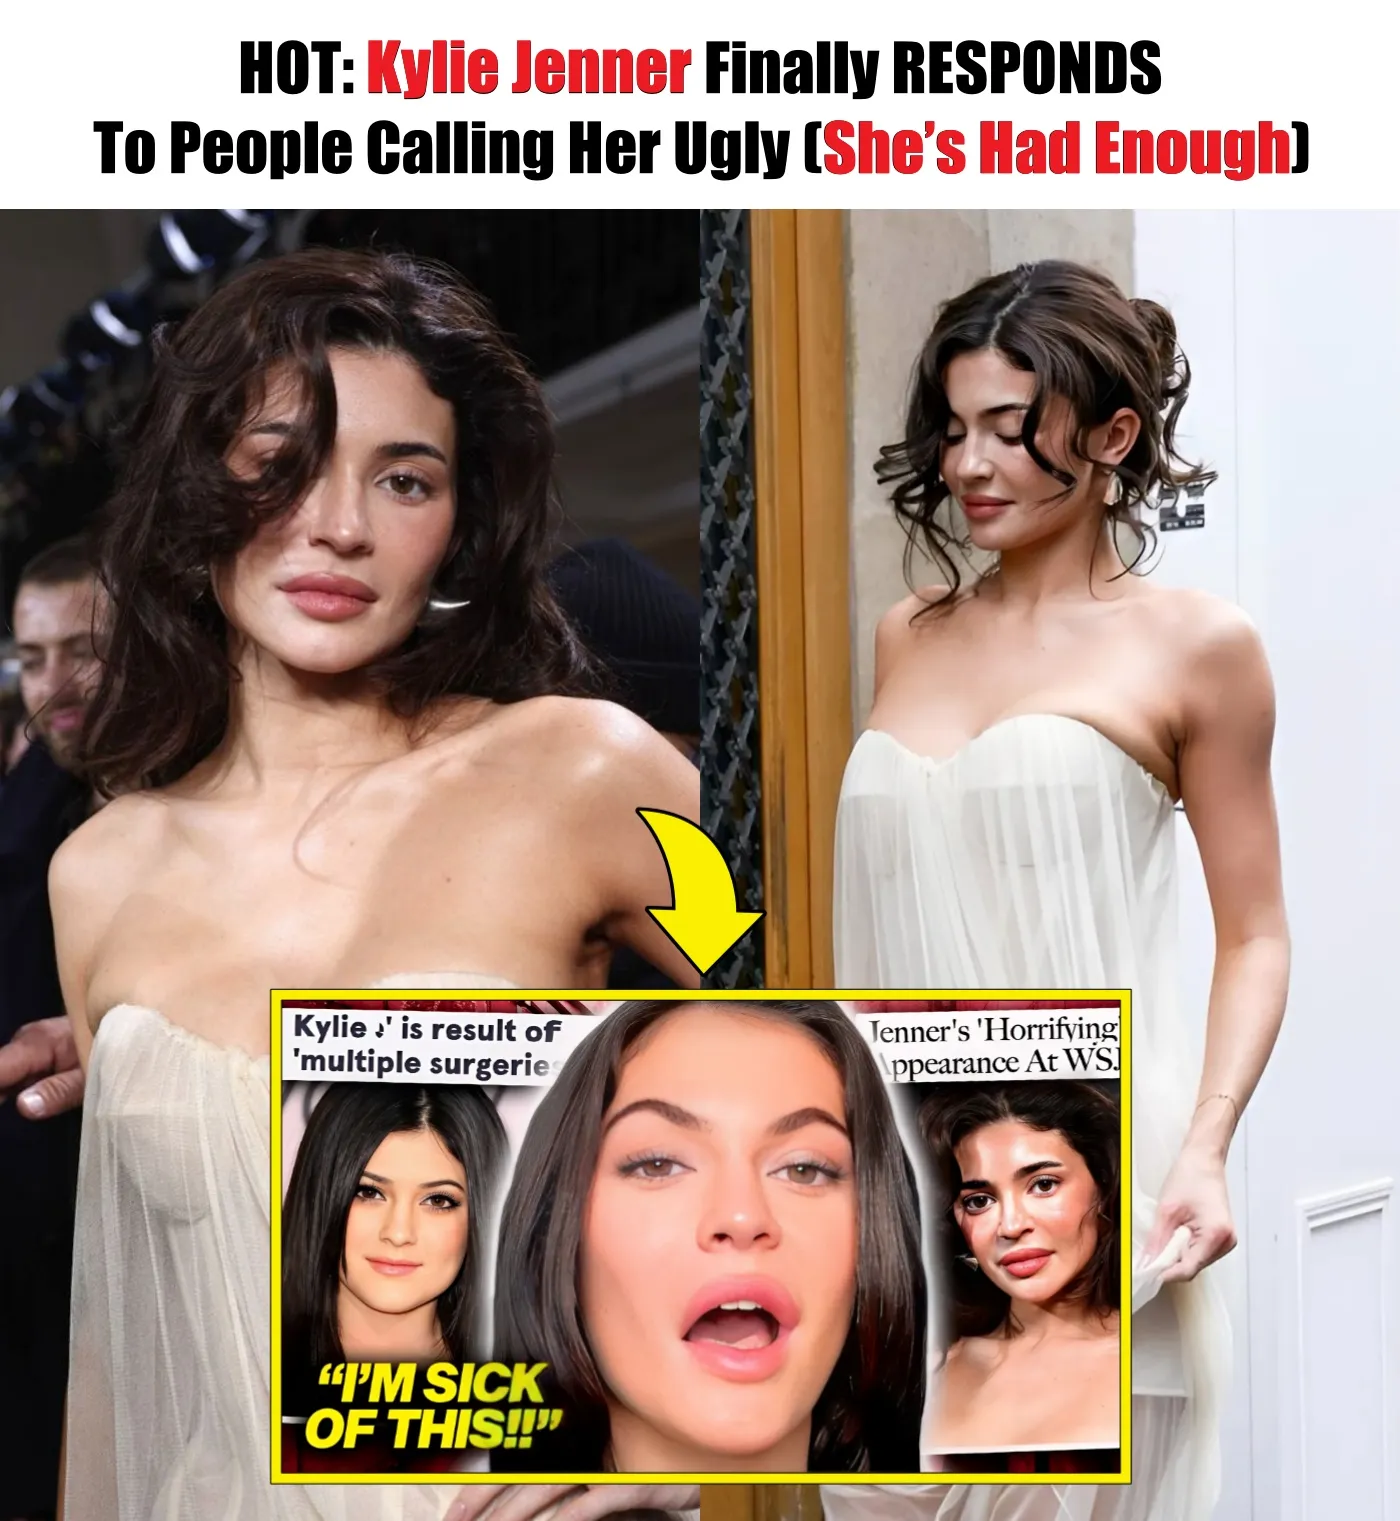 Cover Image for Kylie Jenner Finally RESPONDS To People Calling Her Ugly (She’s Had Enough)